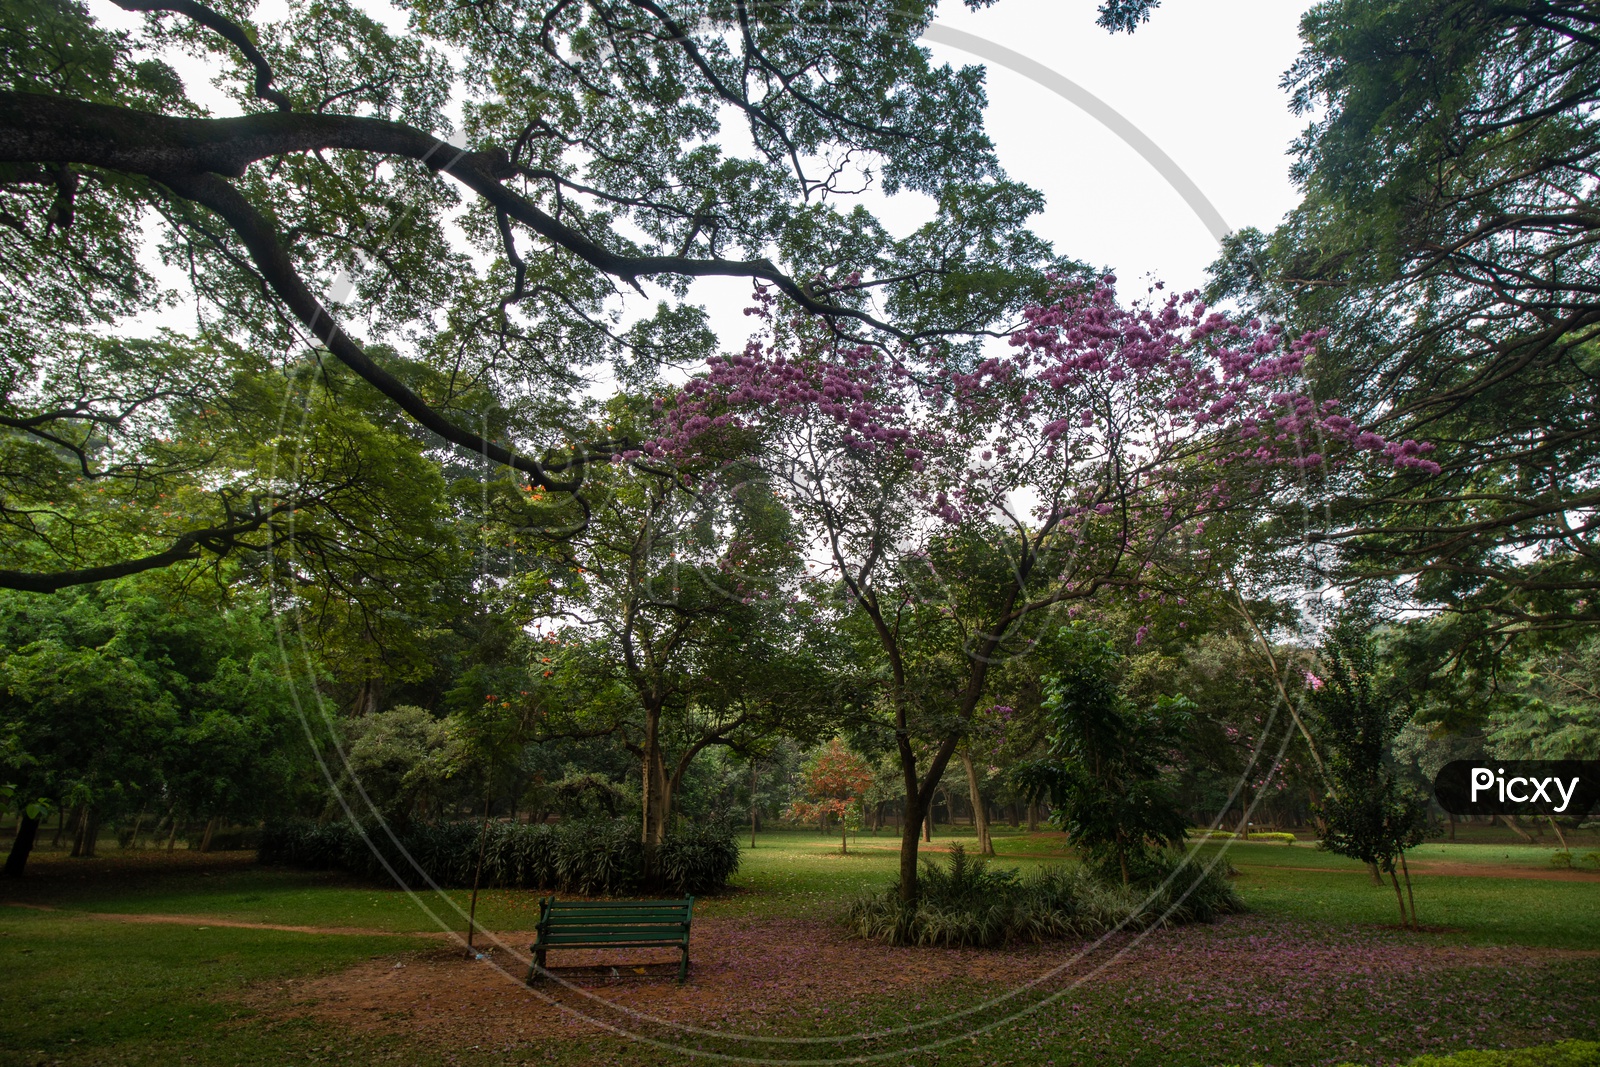 A Alone Bench in Cubbon Park